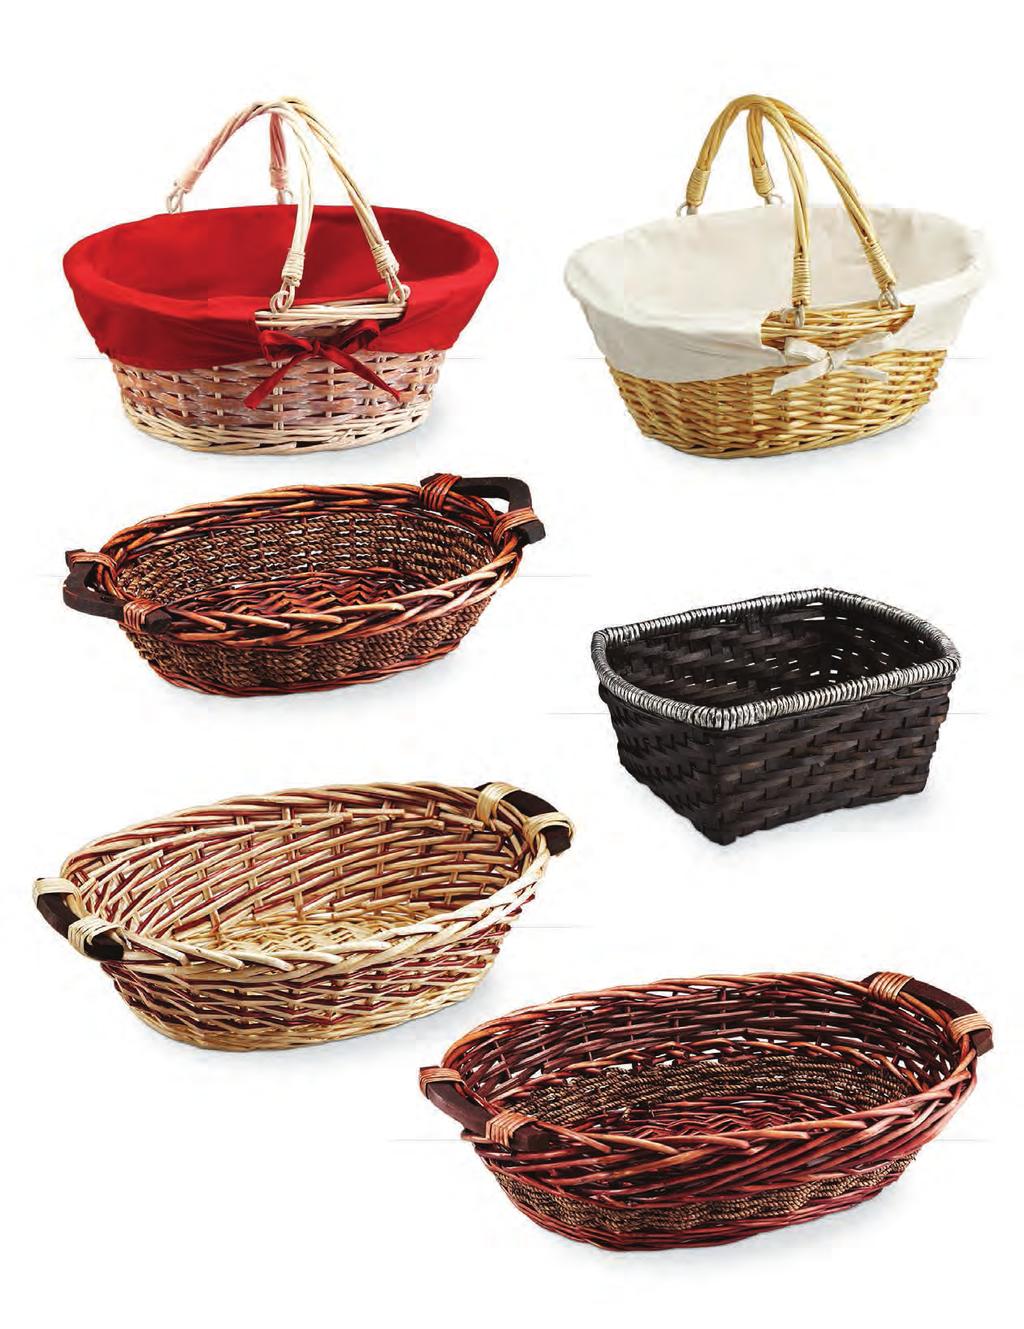 Baskets Without Plastic Liners 41075-RED Willow with Drop Handles and Red Fabric Lining Buff color and whitewash finish 13 x 10.25 x 4.75 3/$6.49 ea.